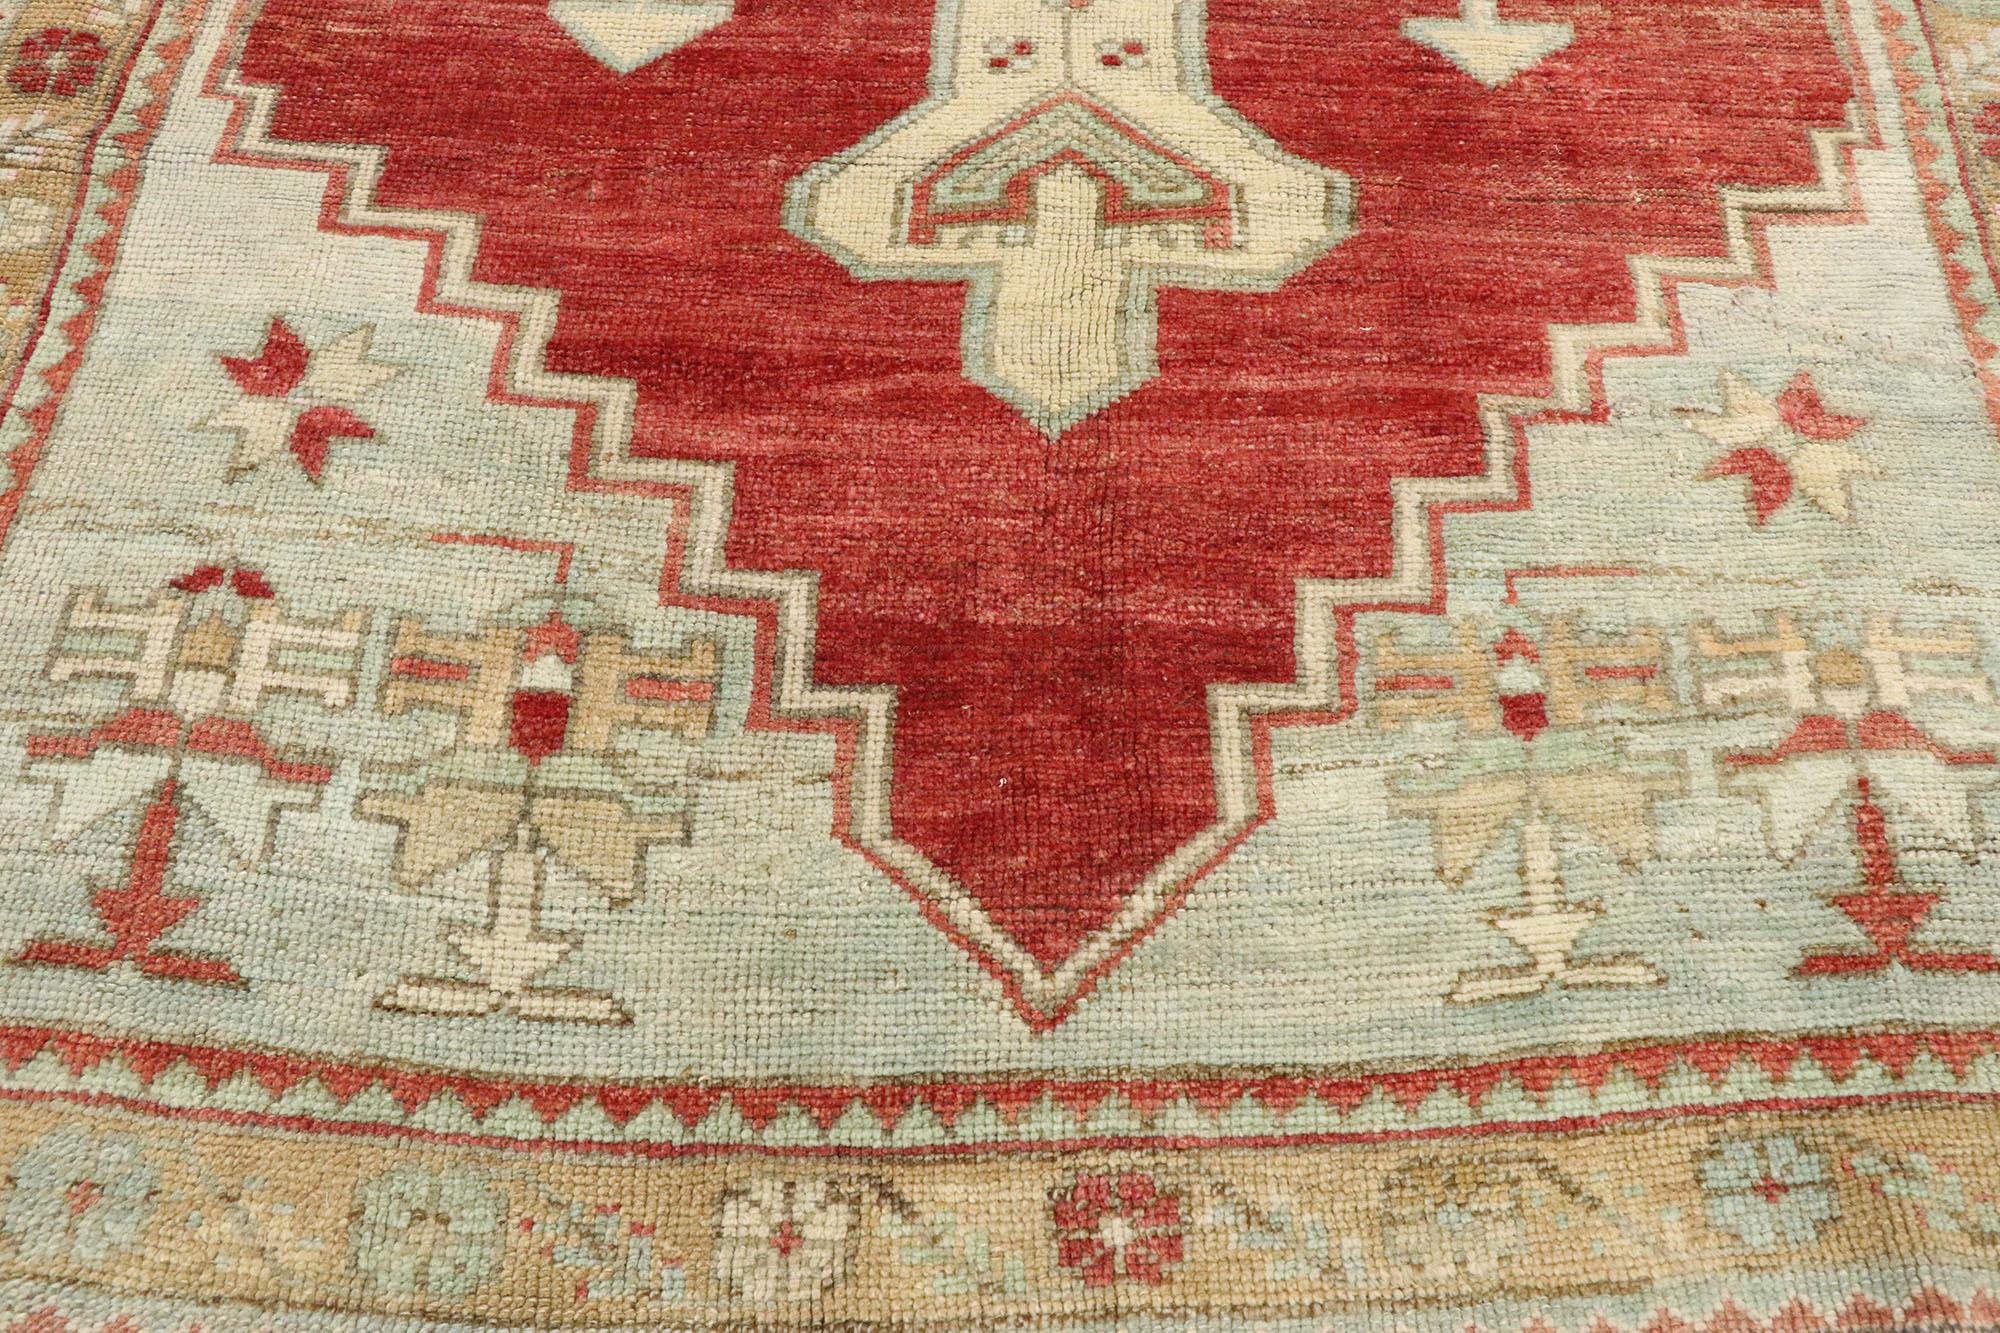 Vintage Turkish Oushak Rug with New England Cape Cod Style In Good Condition For Sale In Dallas, TX